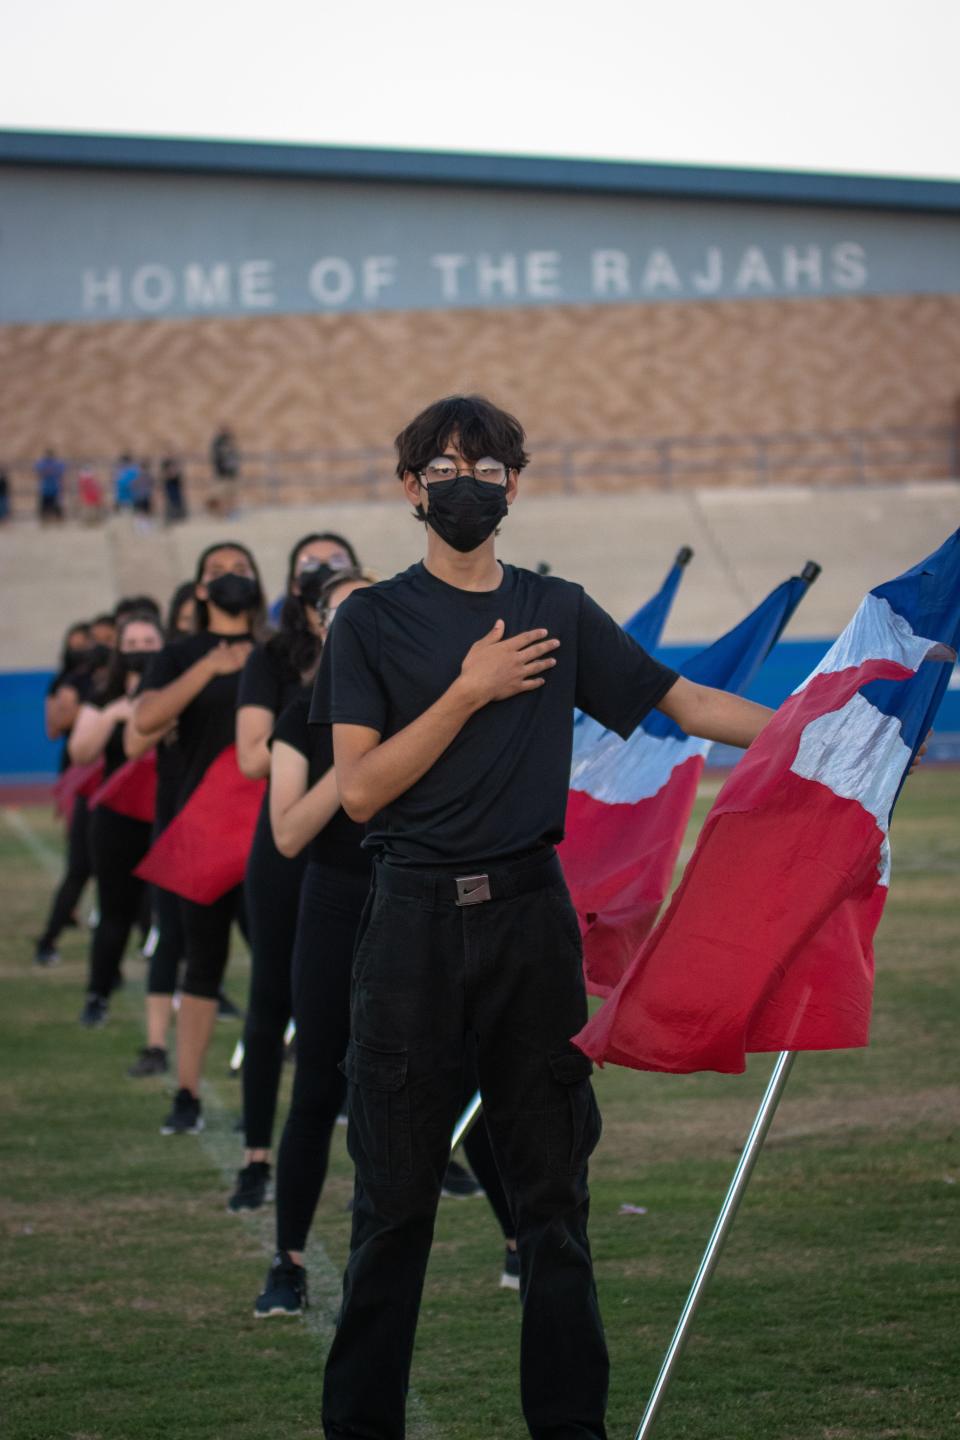 Indio High School's color guard opens up the game for Indio vs Brawley, September 2, 2021.